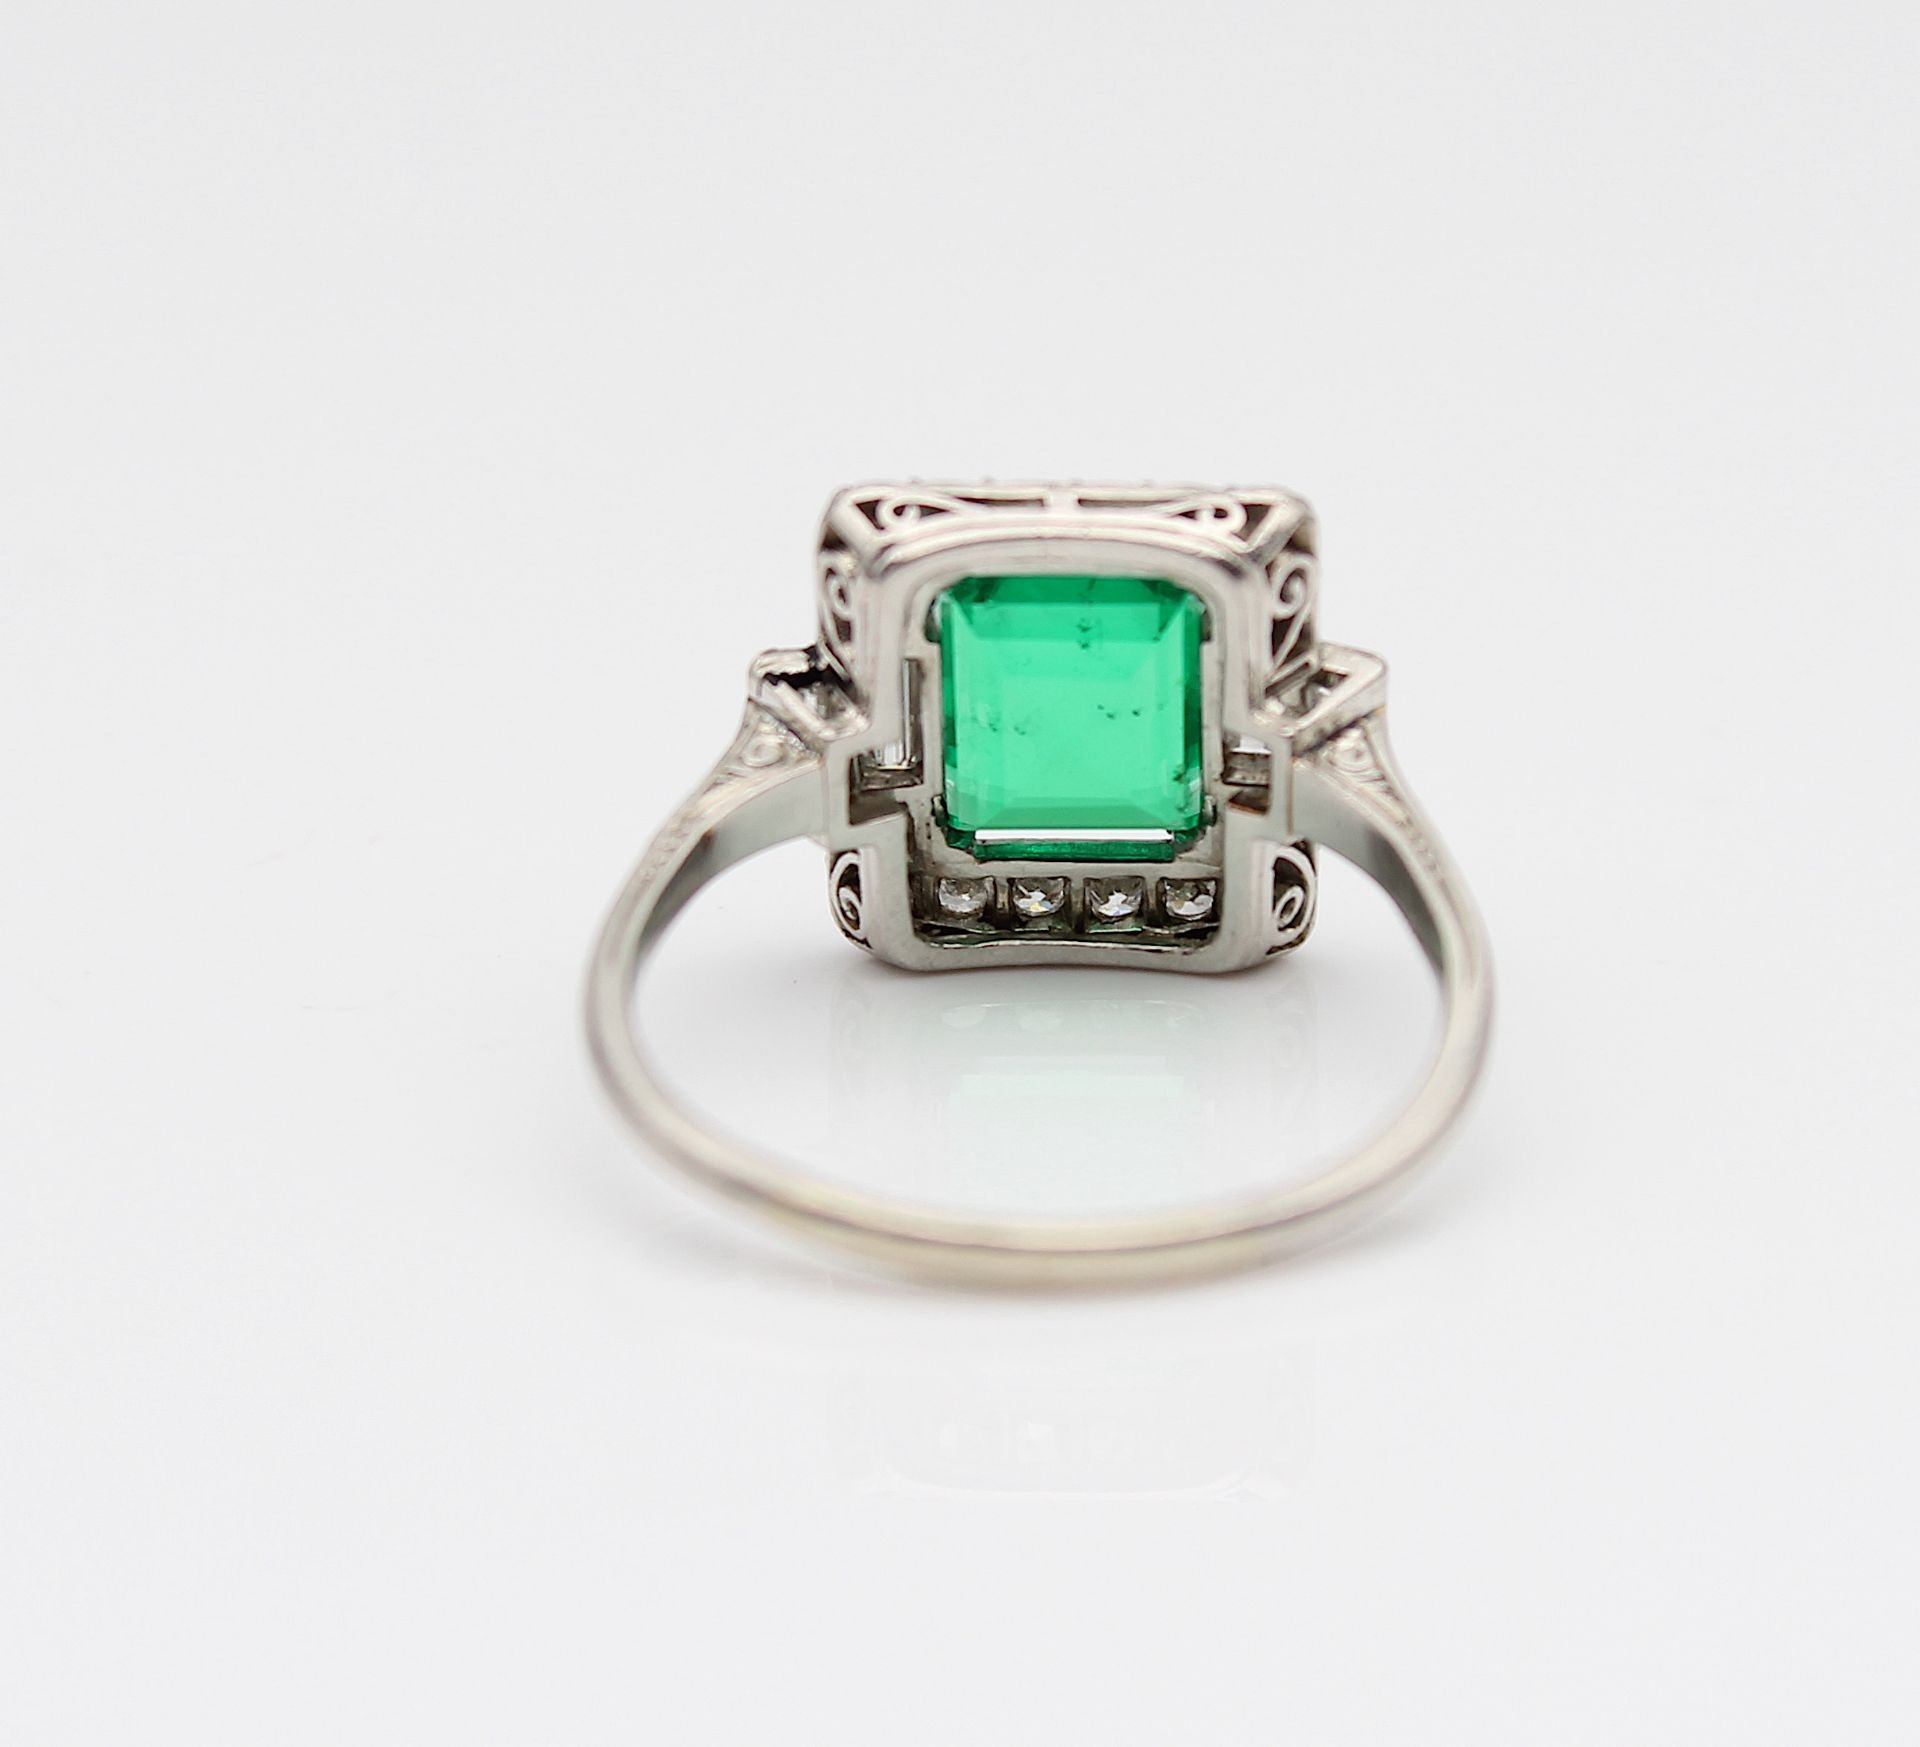 Platinum ring with an emerald and diamonds - Image 4 of 4